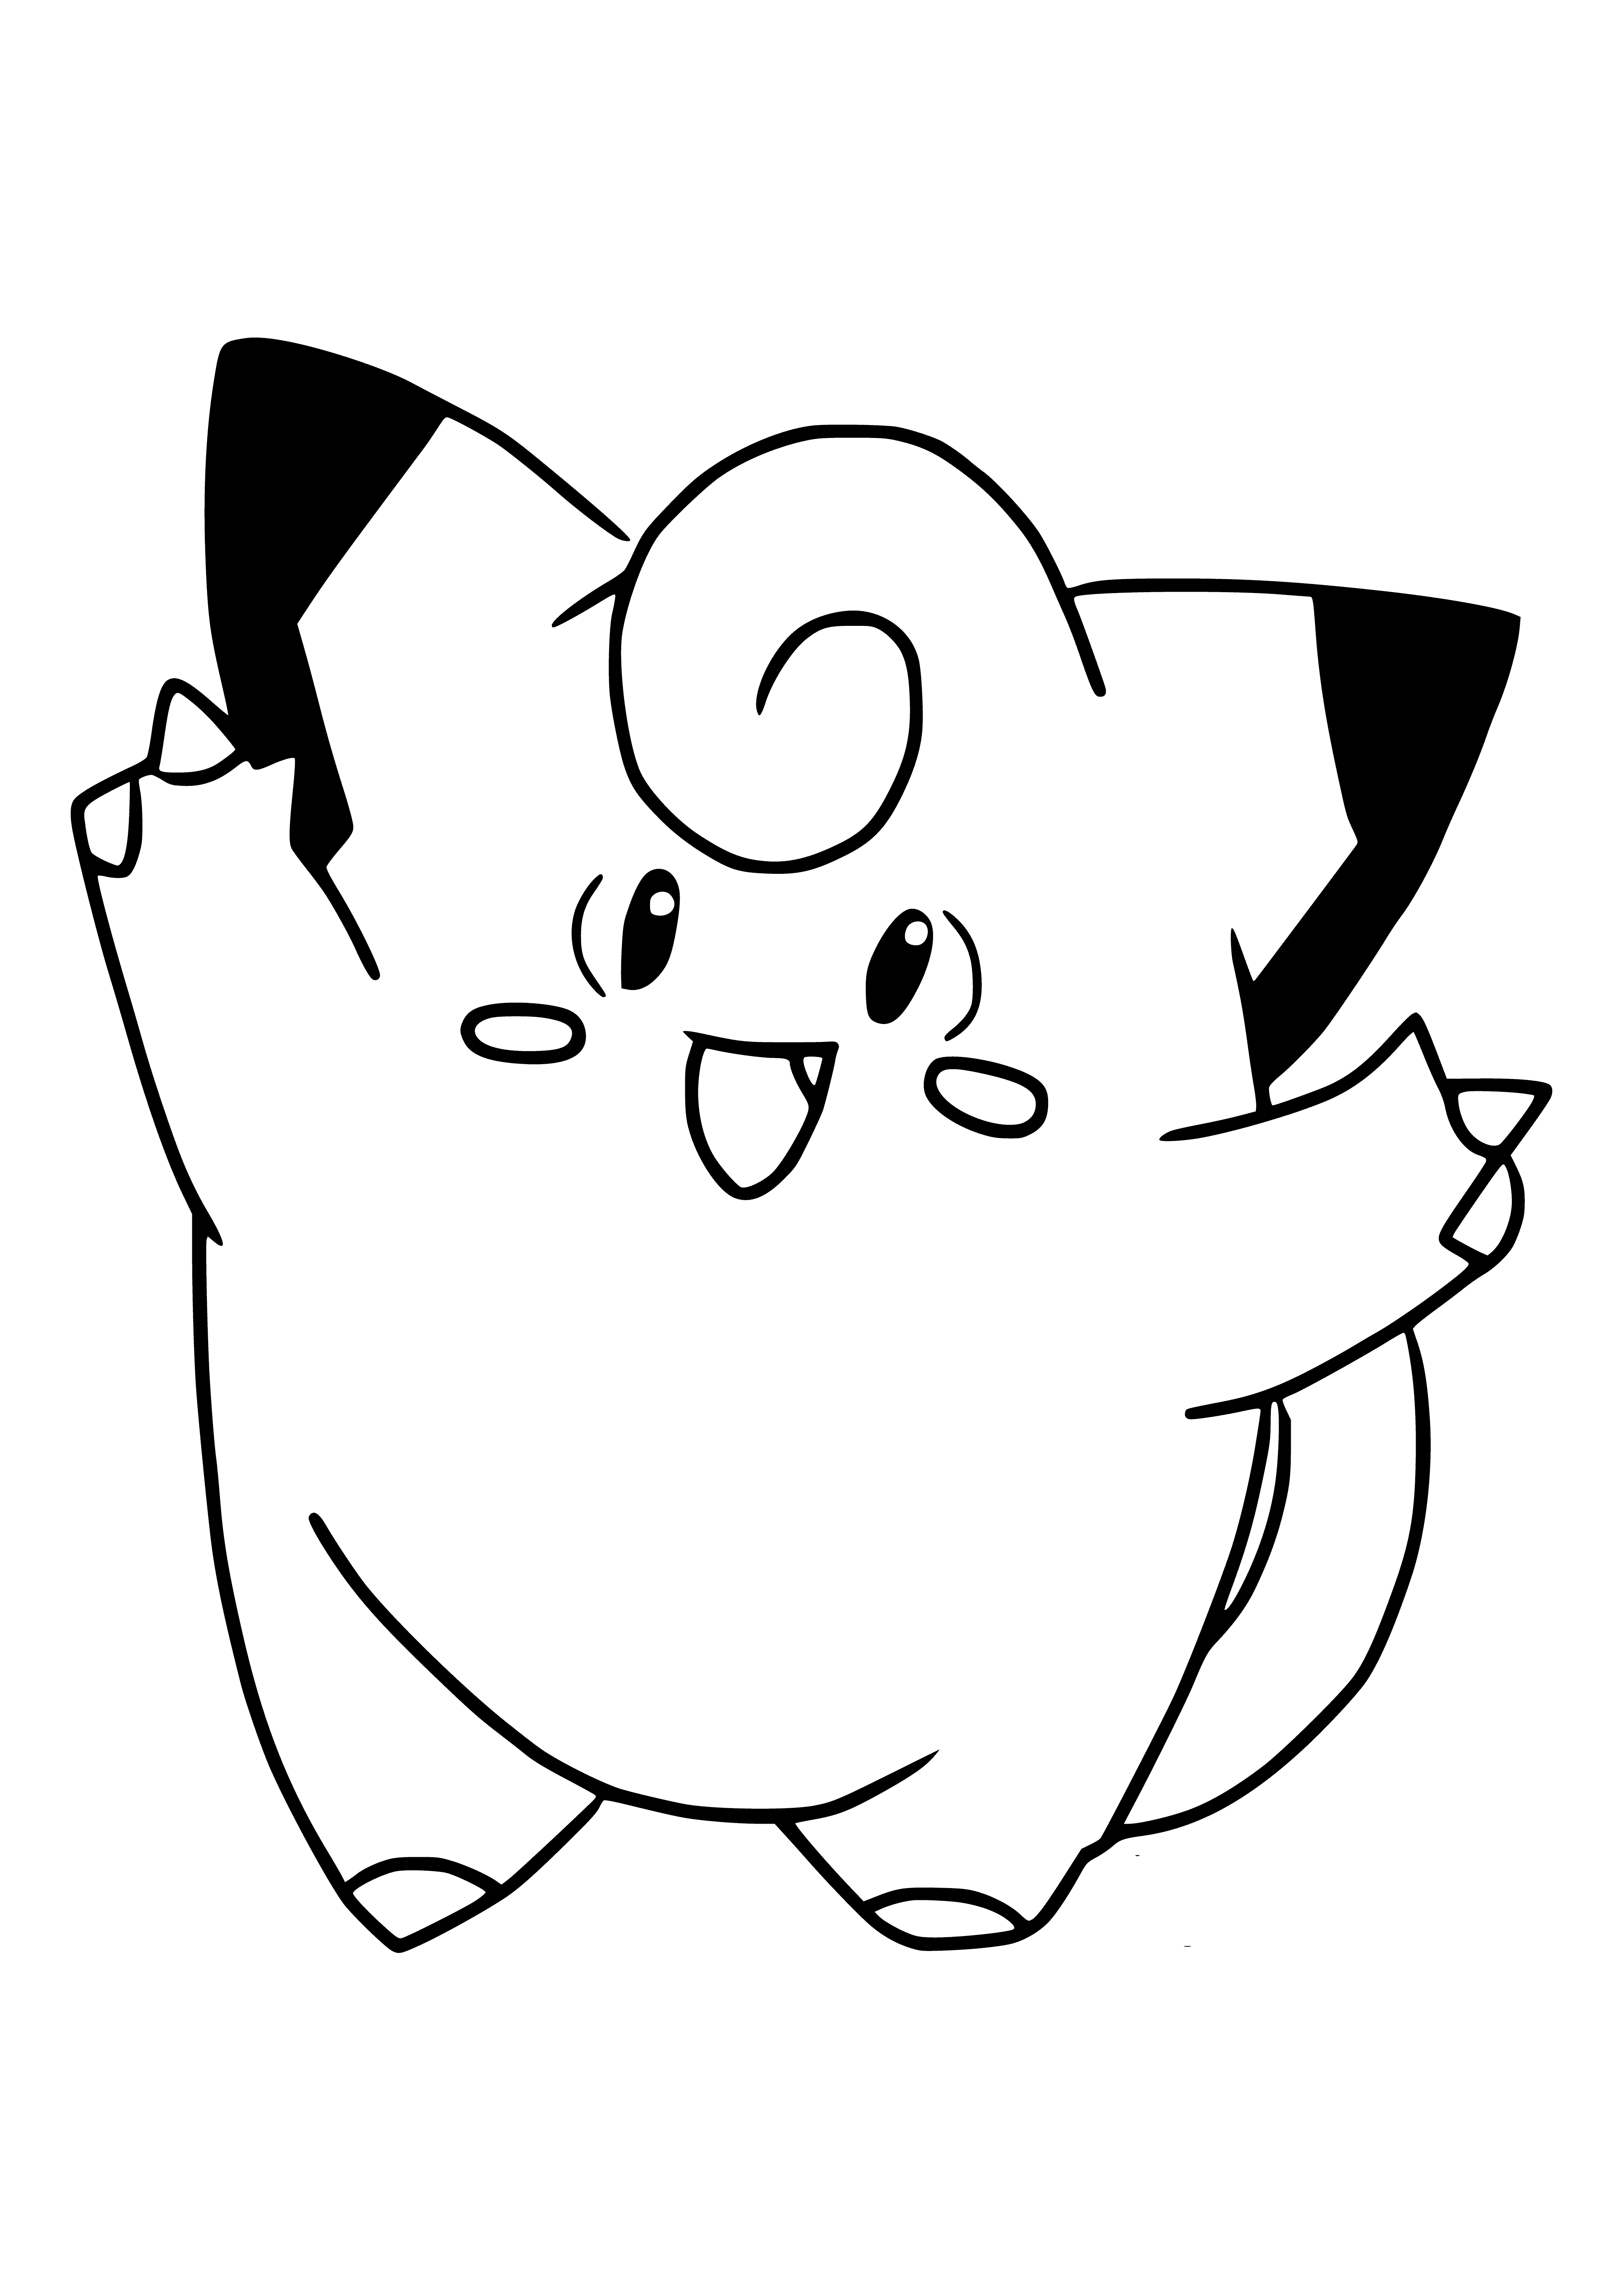 Pokemon Clefairy coloring page